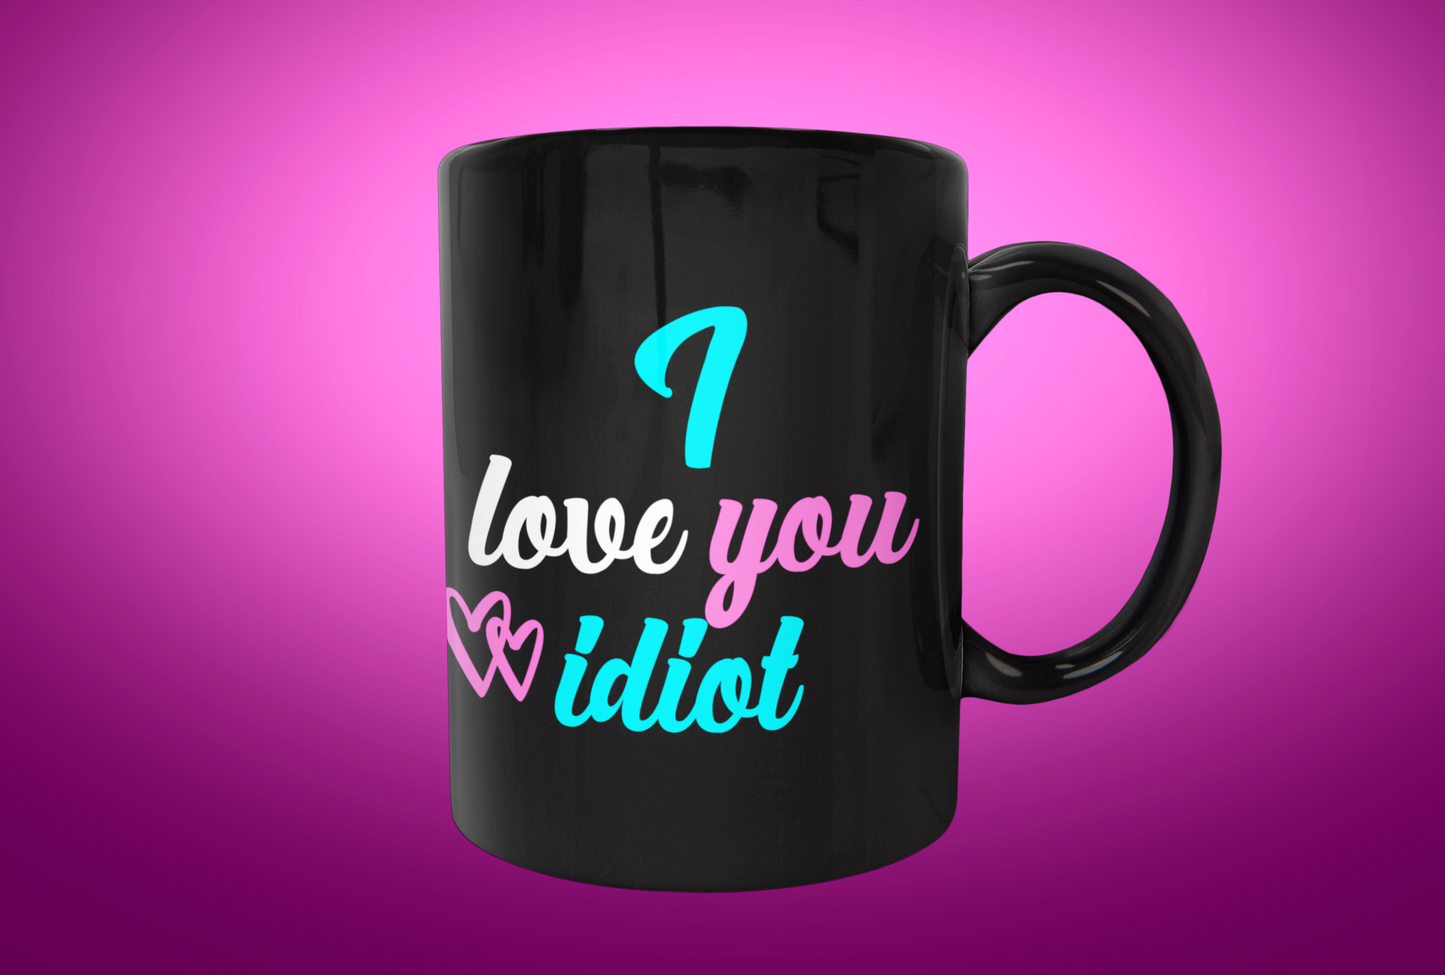 Black mug that says "I love you idiot" in blue white and pink characters.